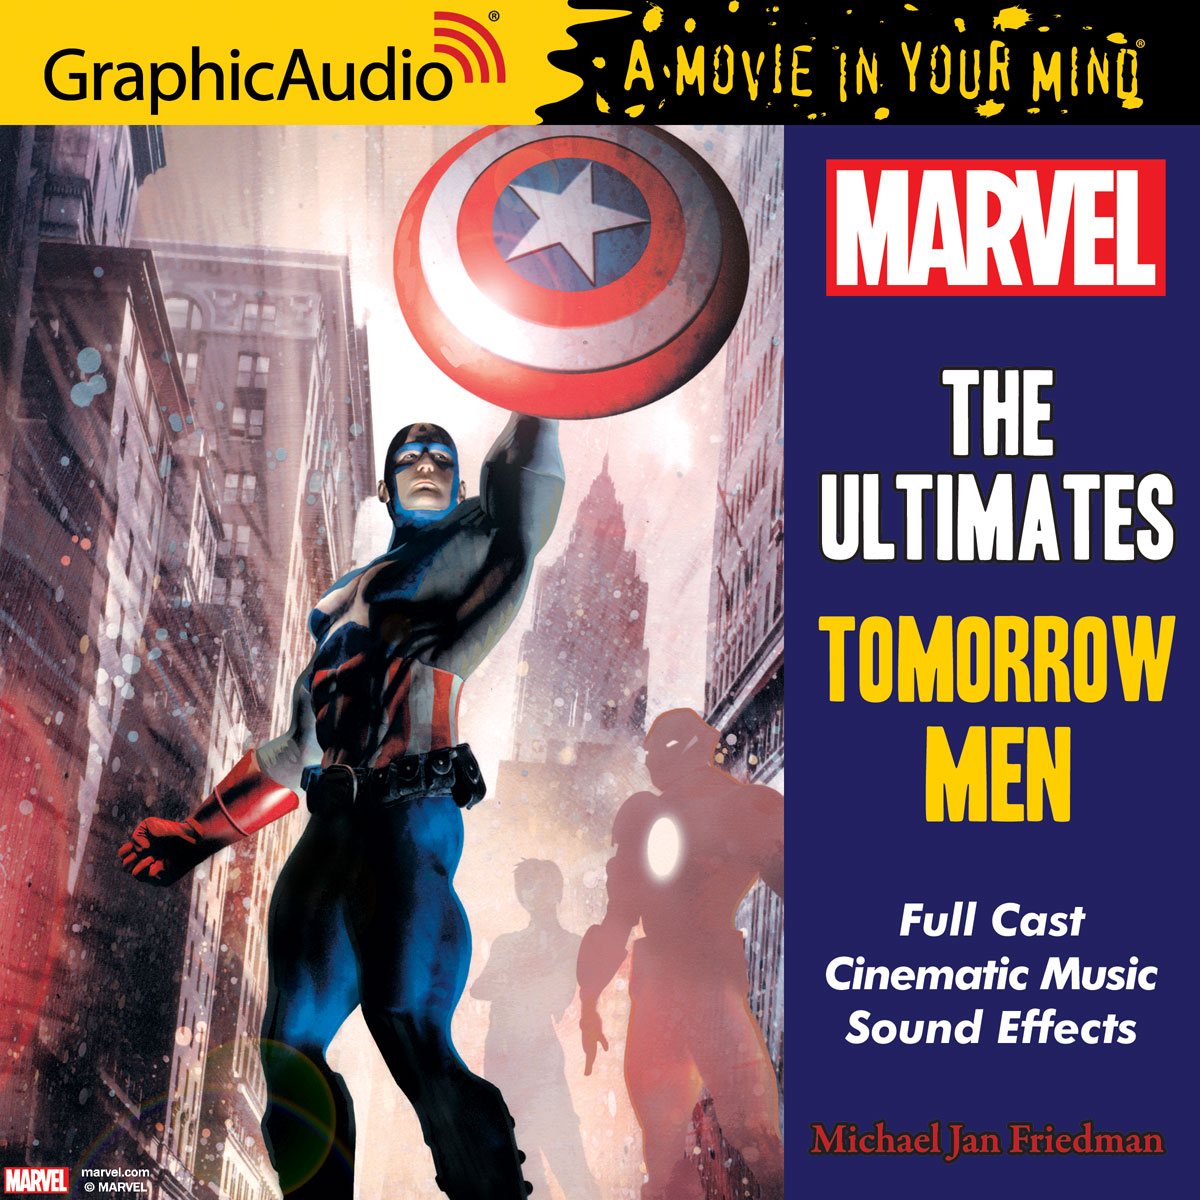 MARVEL’S THE ULTIMATES: TOMORROW MEN Now Available in GraphicAudio®